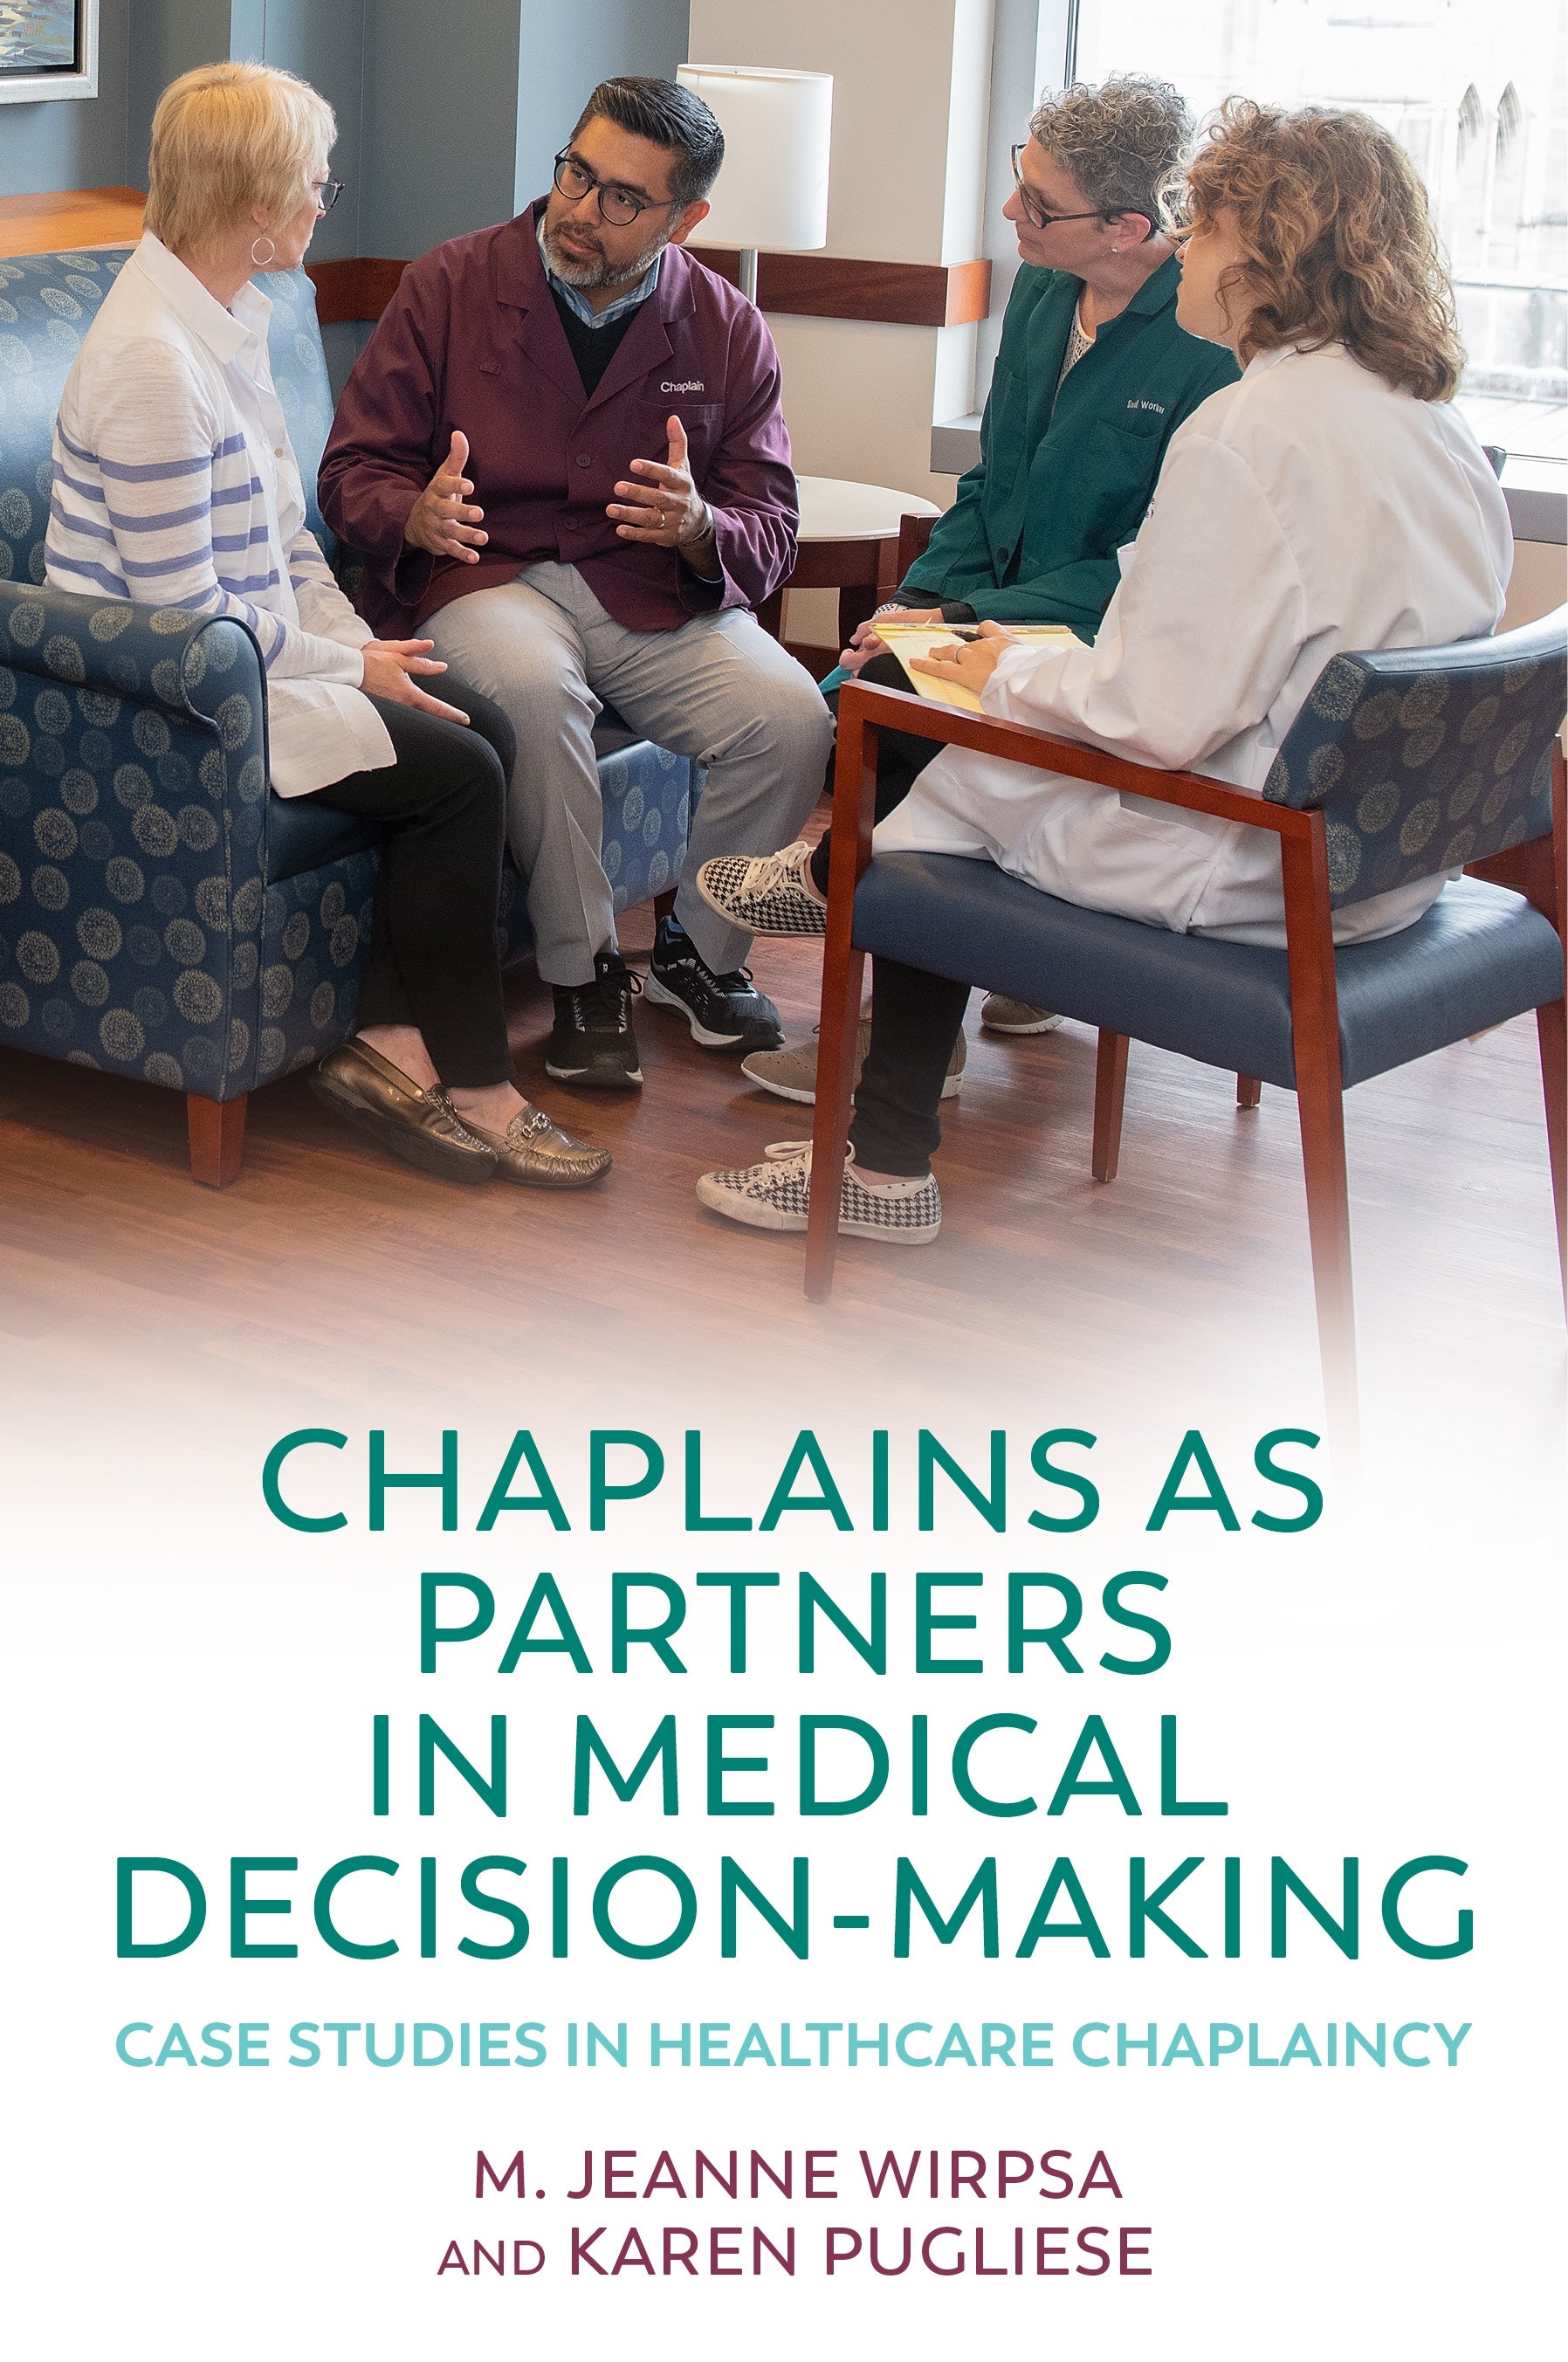 Chaplains as Partners in Medical Decision-Making by No Author Listed, George Fitchett, M. Jeanne Wirpsa, Karen Pugliese